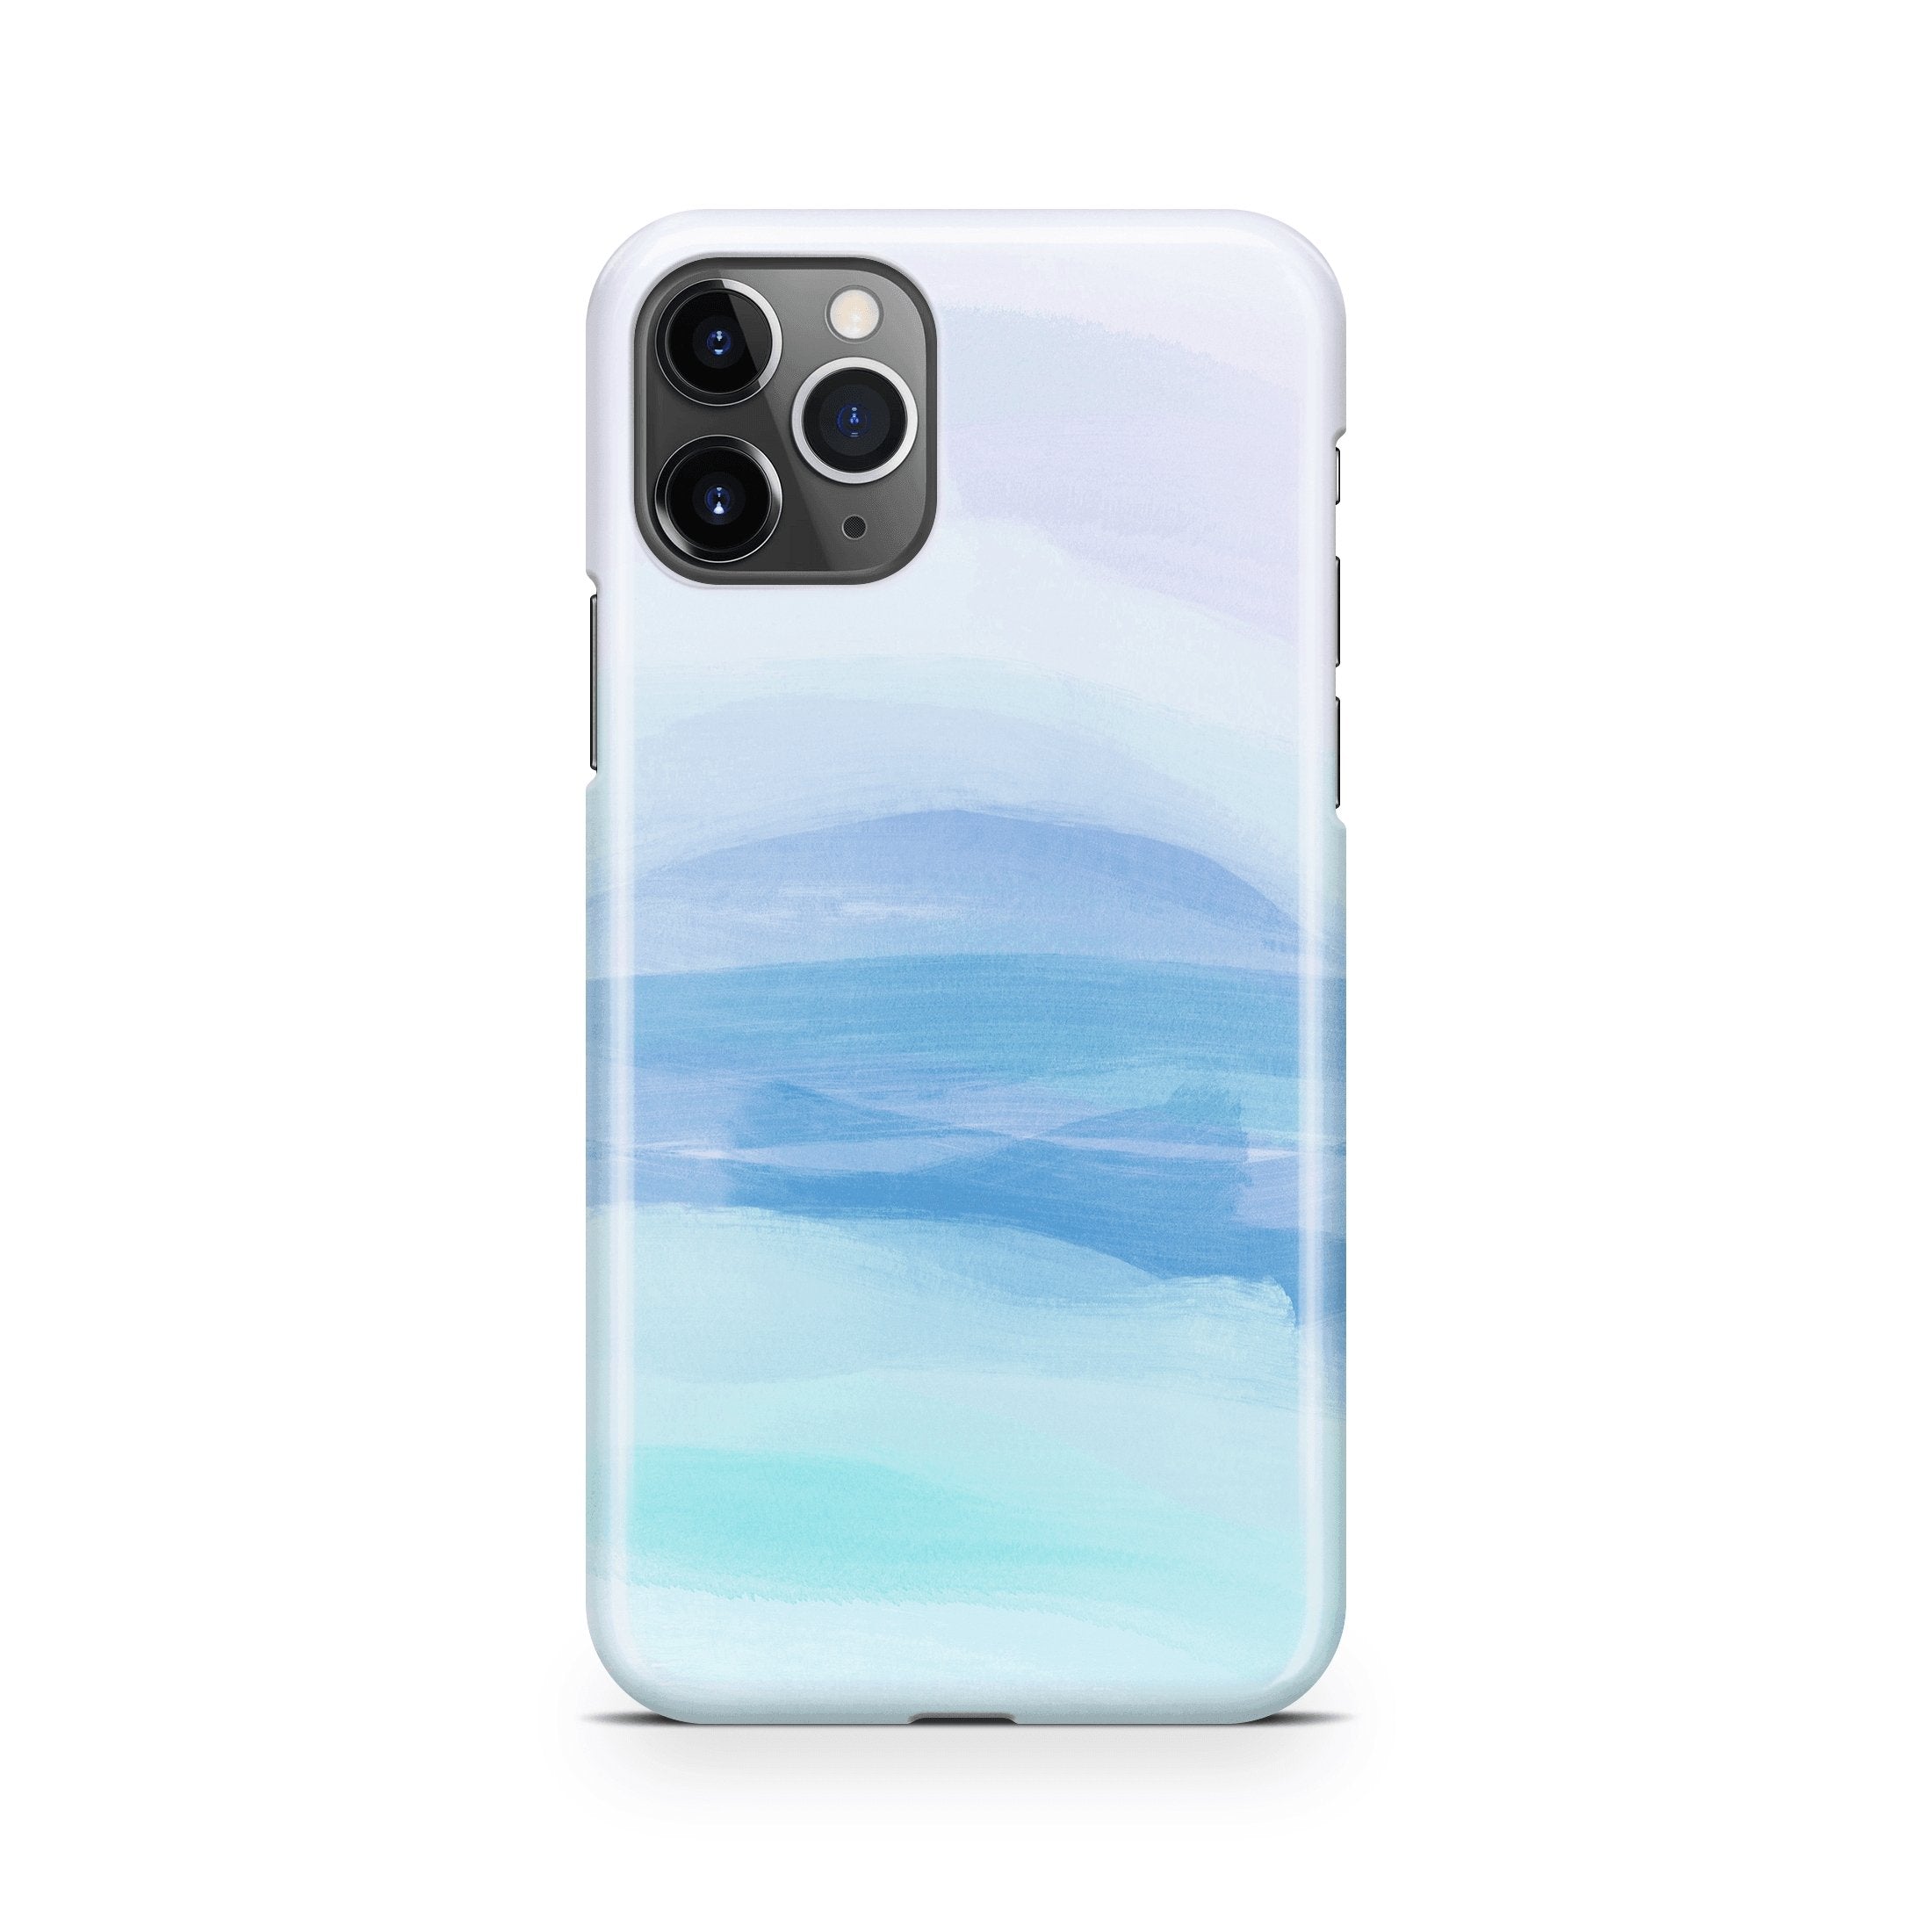 Fading Blue Ombre - iPhone phone case designs by CaseSwagger